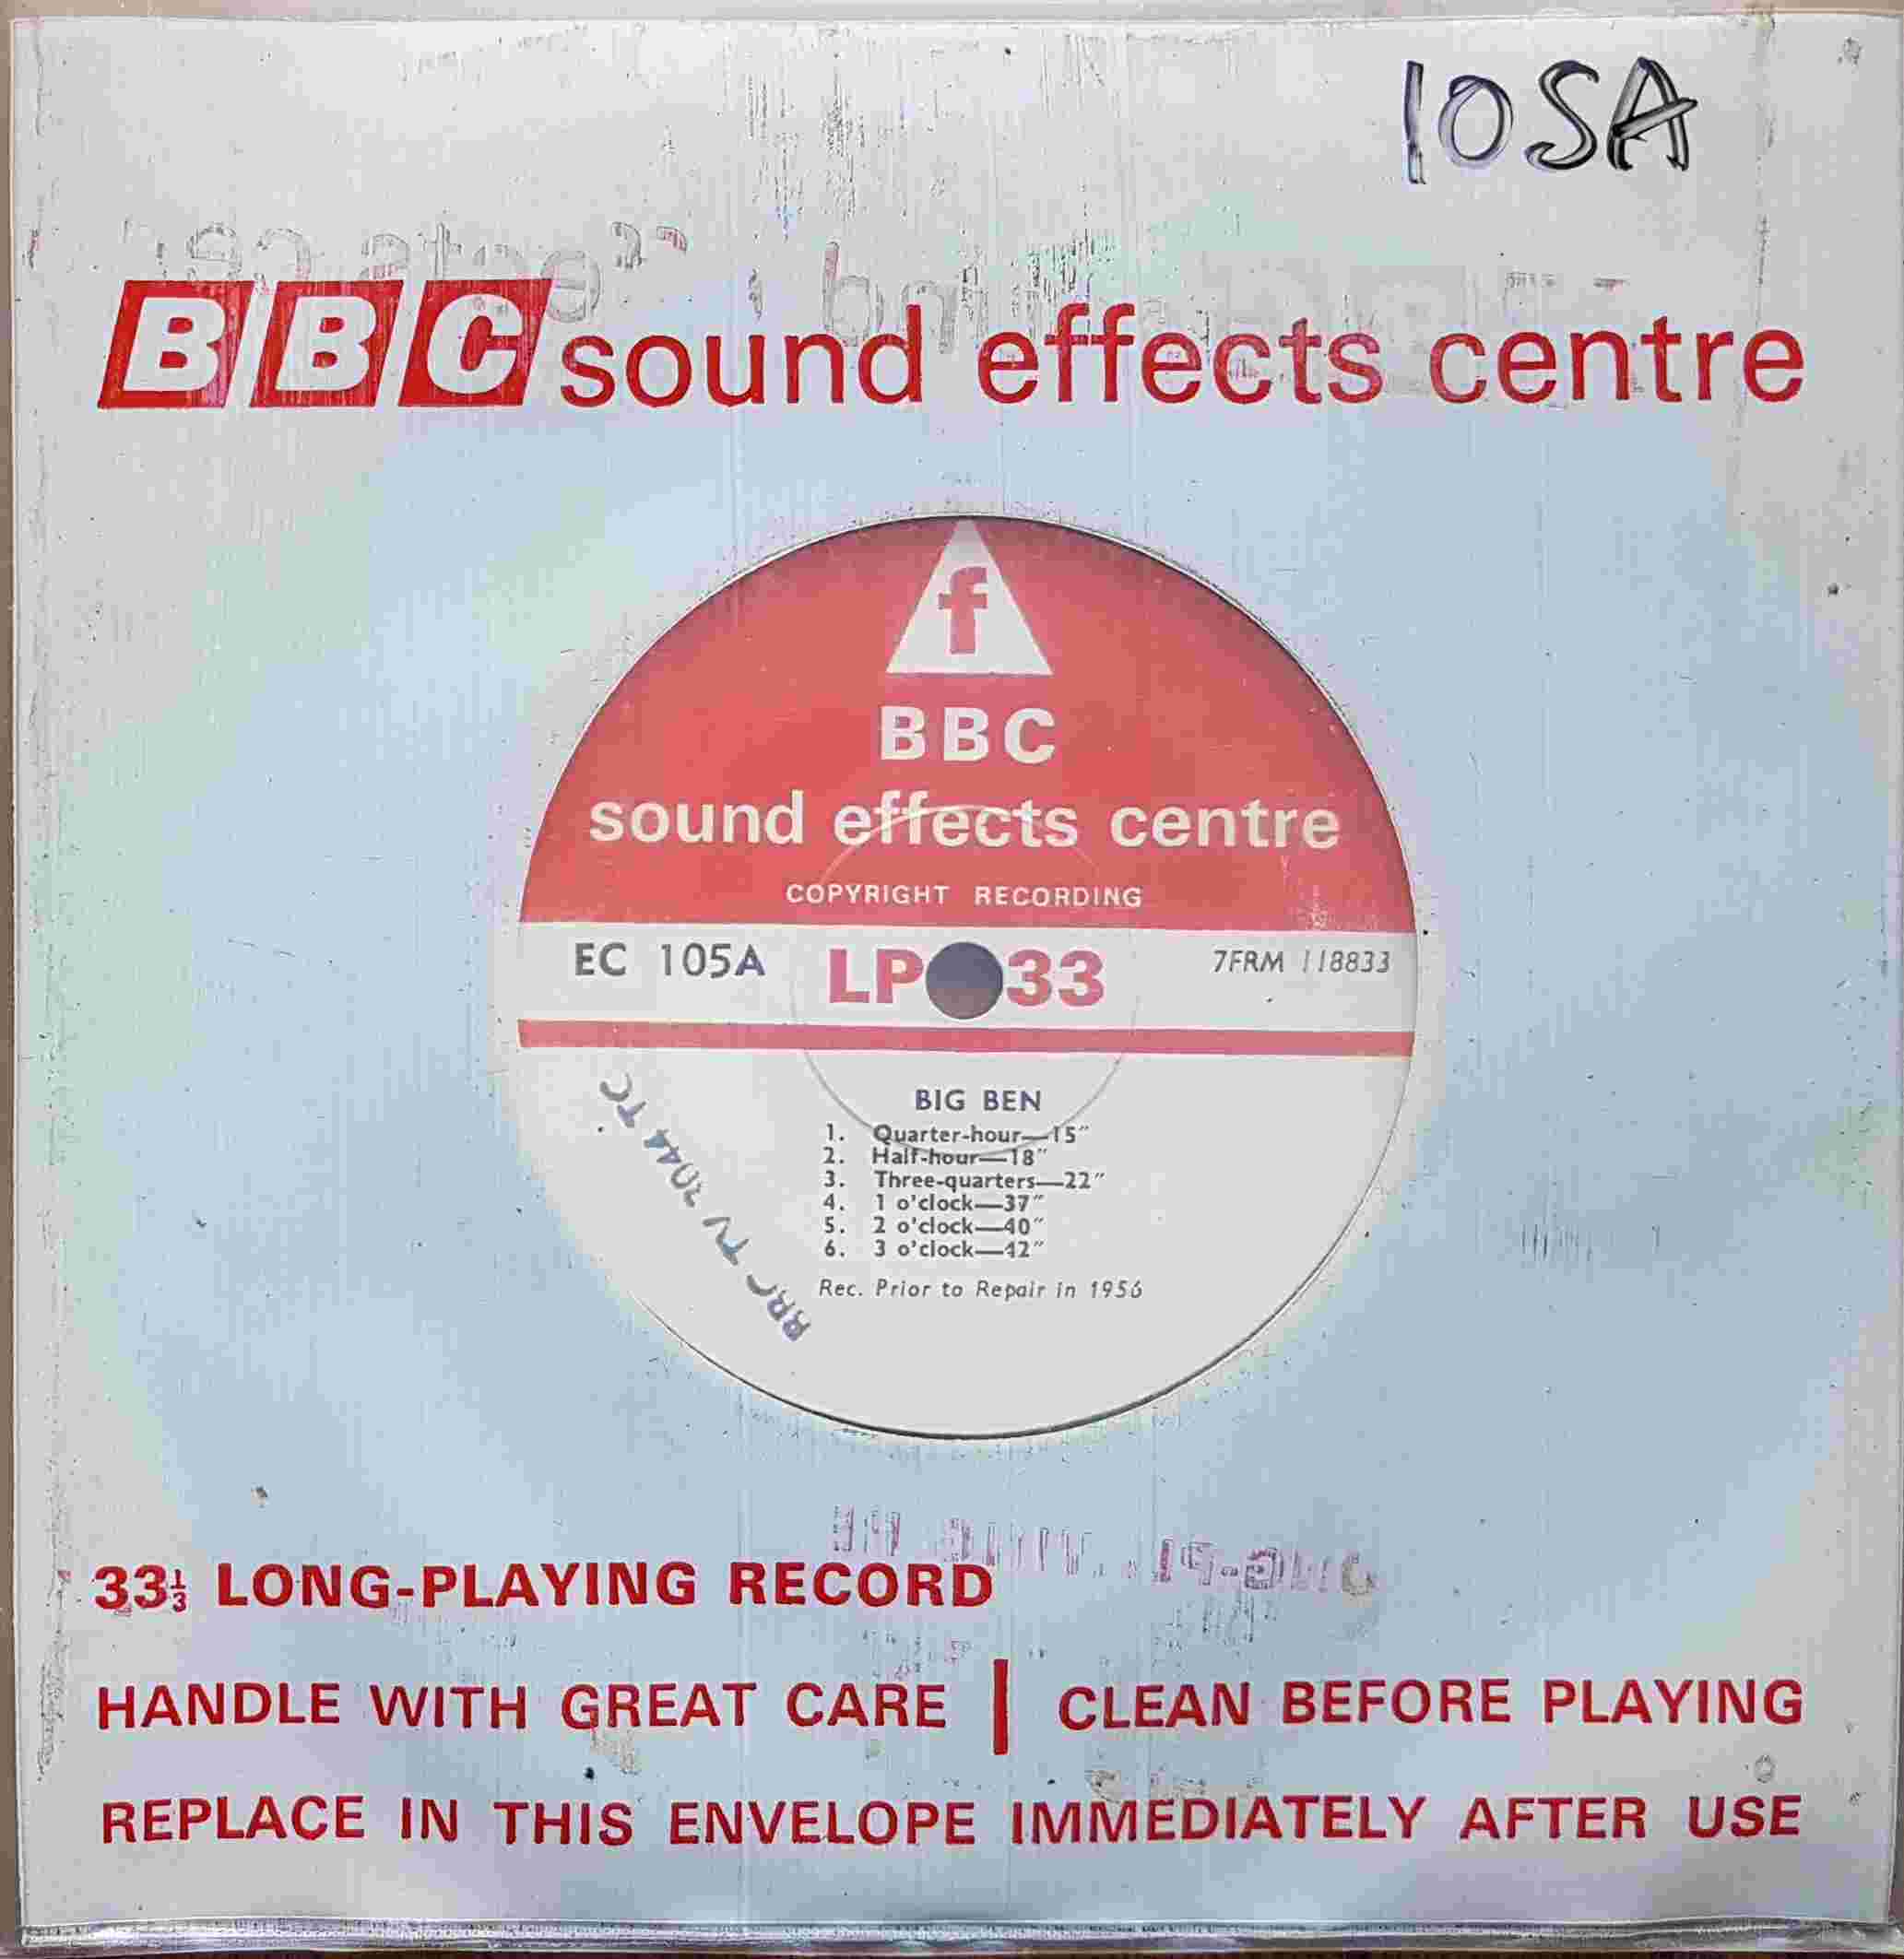 Picture of EC 105A Big Ben by artist Not registered from the BBC records and Tapes library